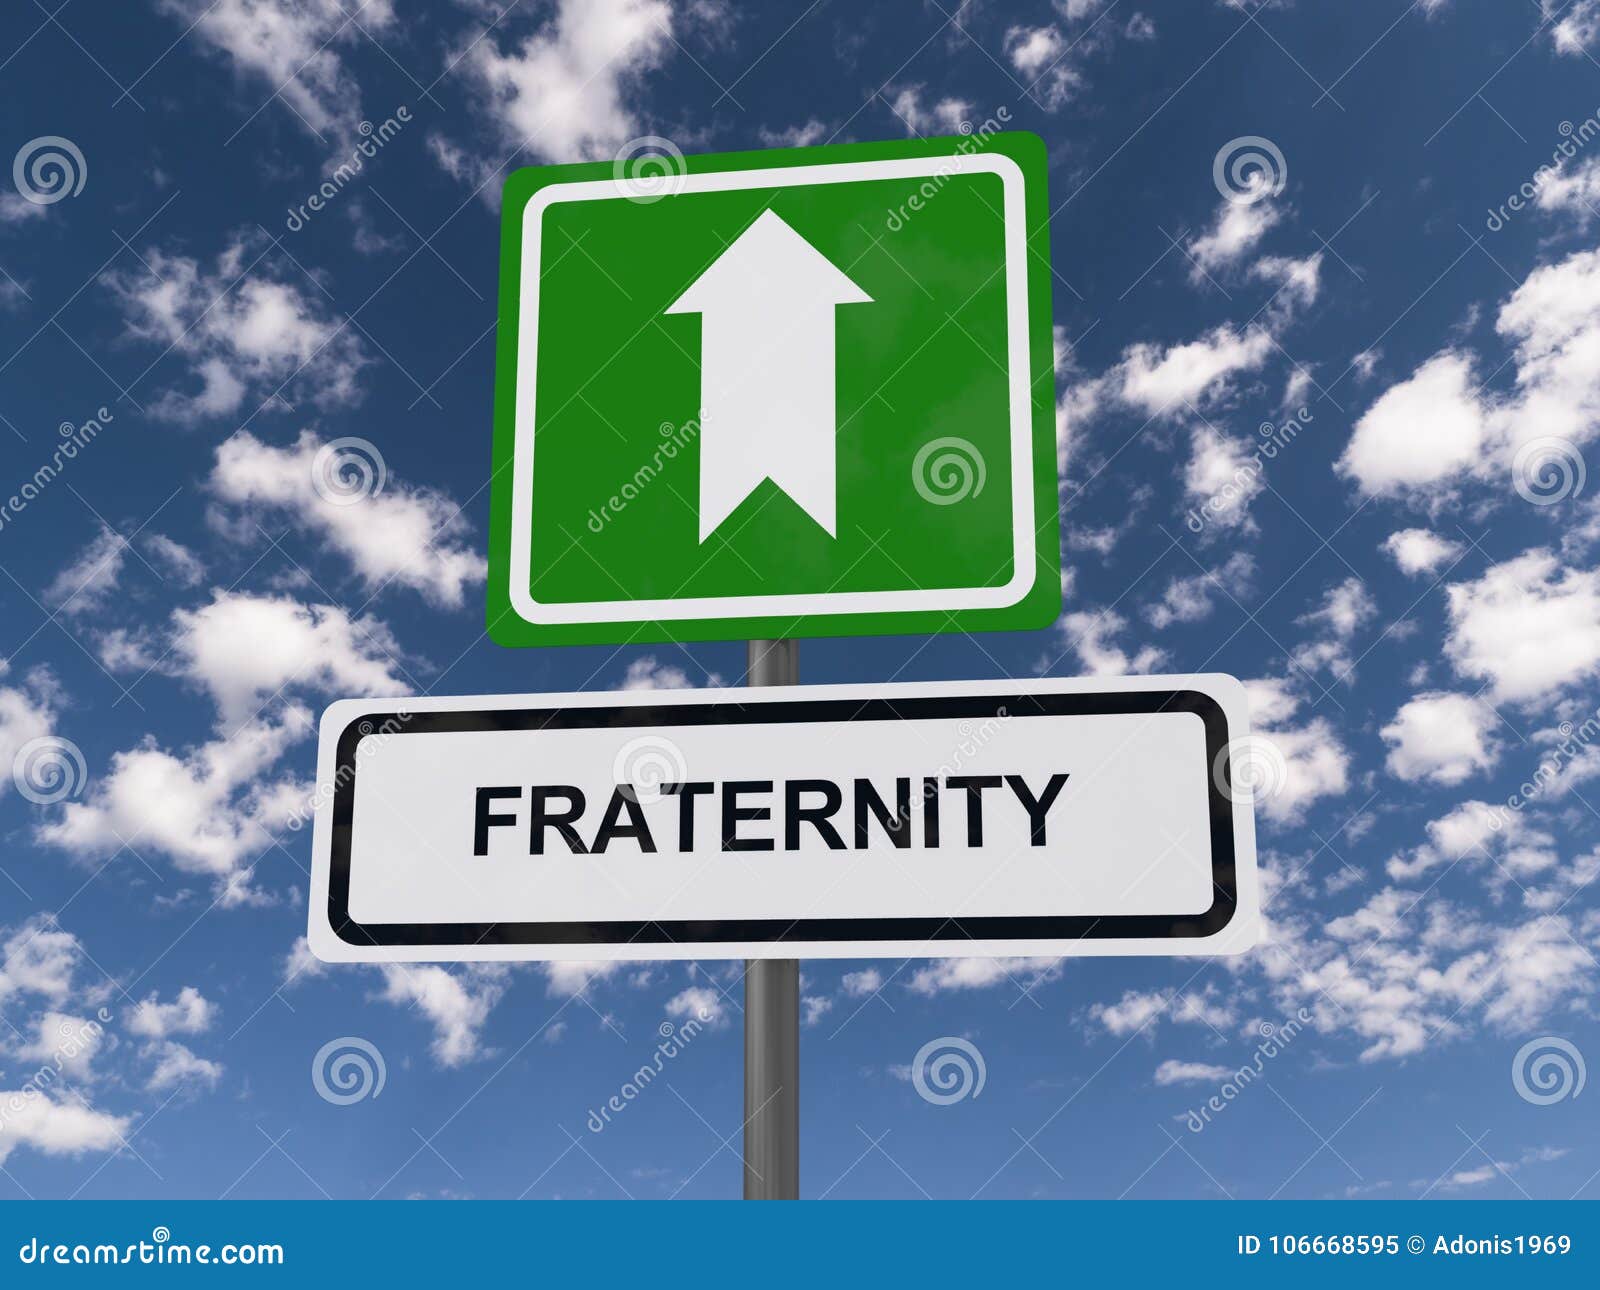 fraternity sign